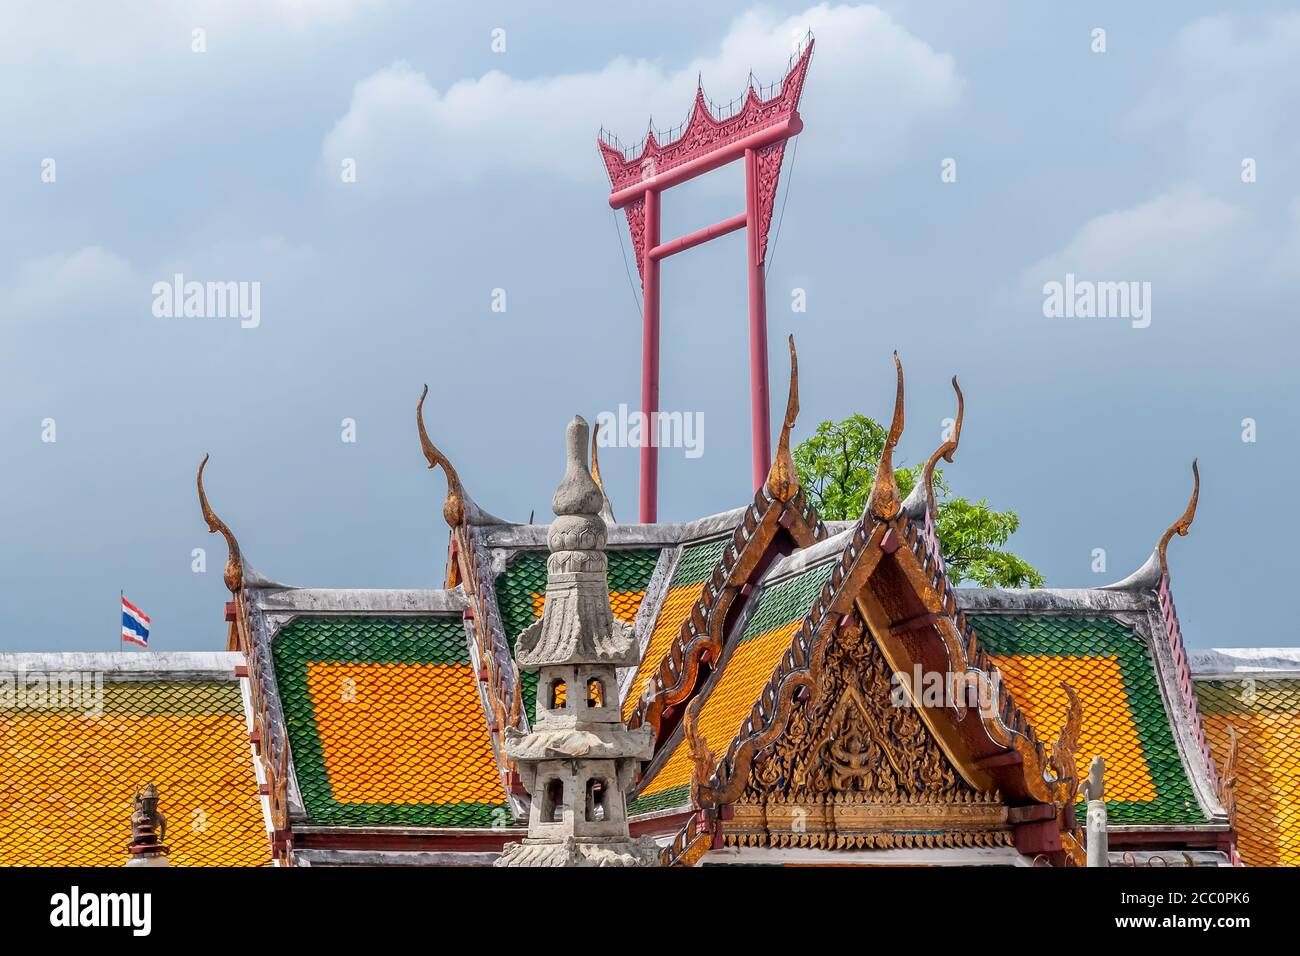 Beautiful detail of the Sao Chingcha Buddhist Temple, The Giant Swing temple, a religious structure in Sao Chingcha Subdistrict, Phra Nakhon District, Stock Photo